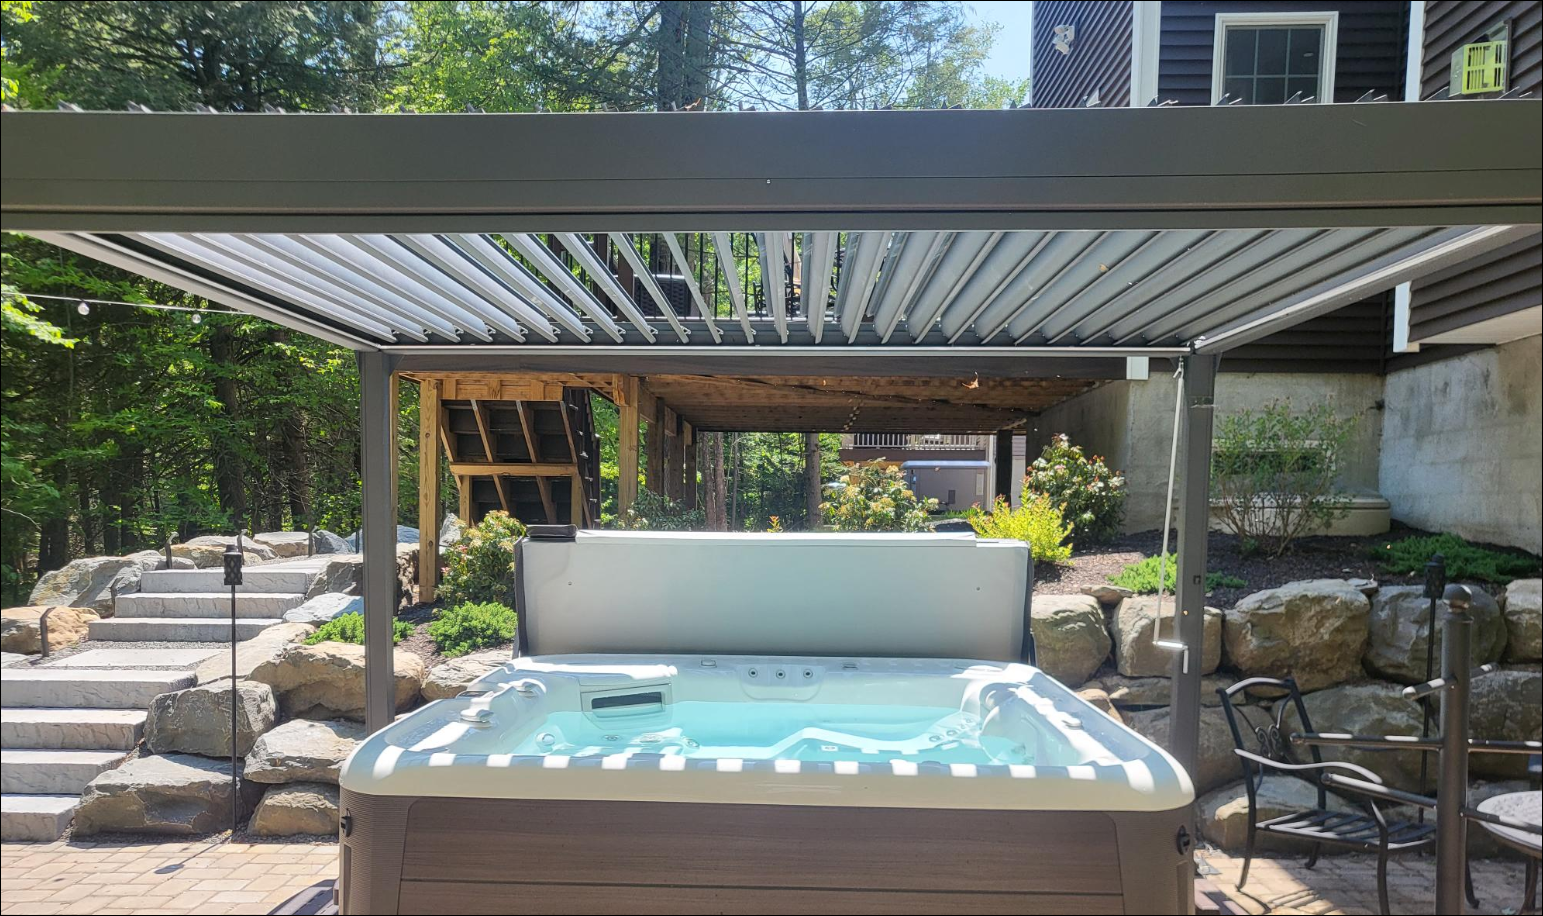 retractable awning over a hot tub